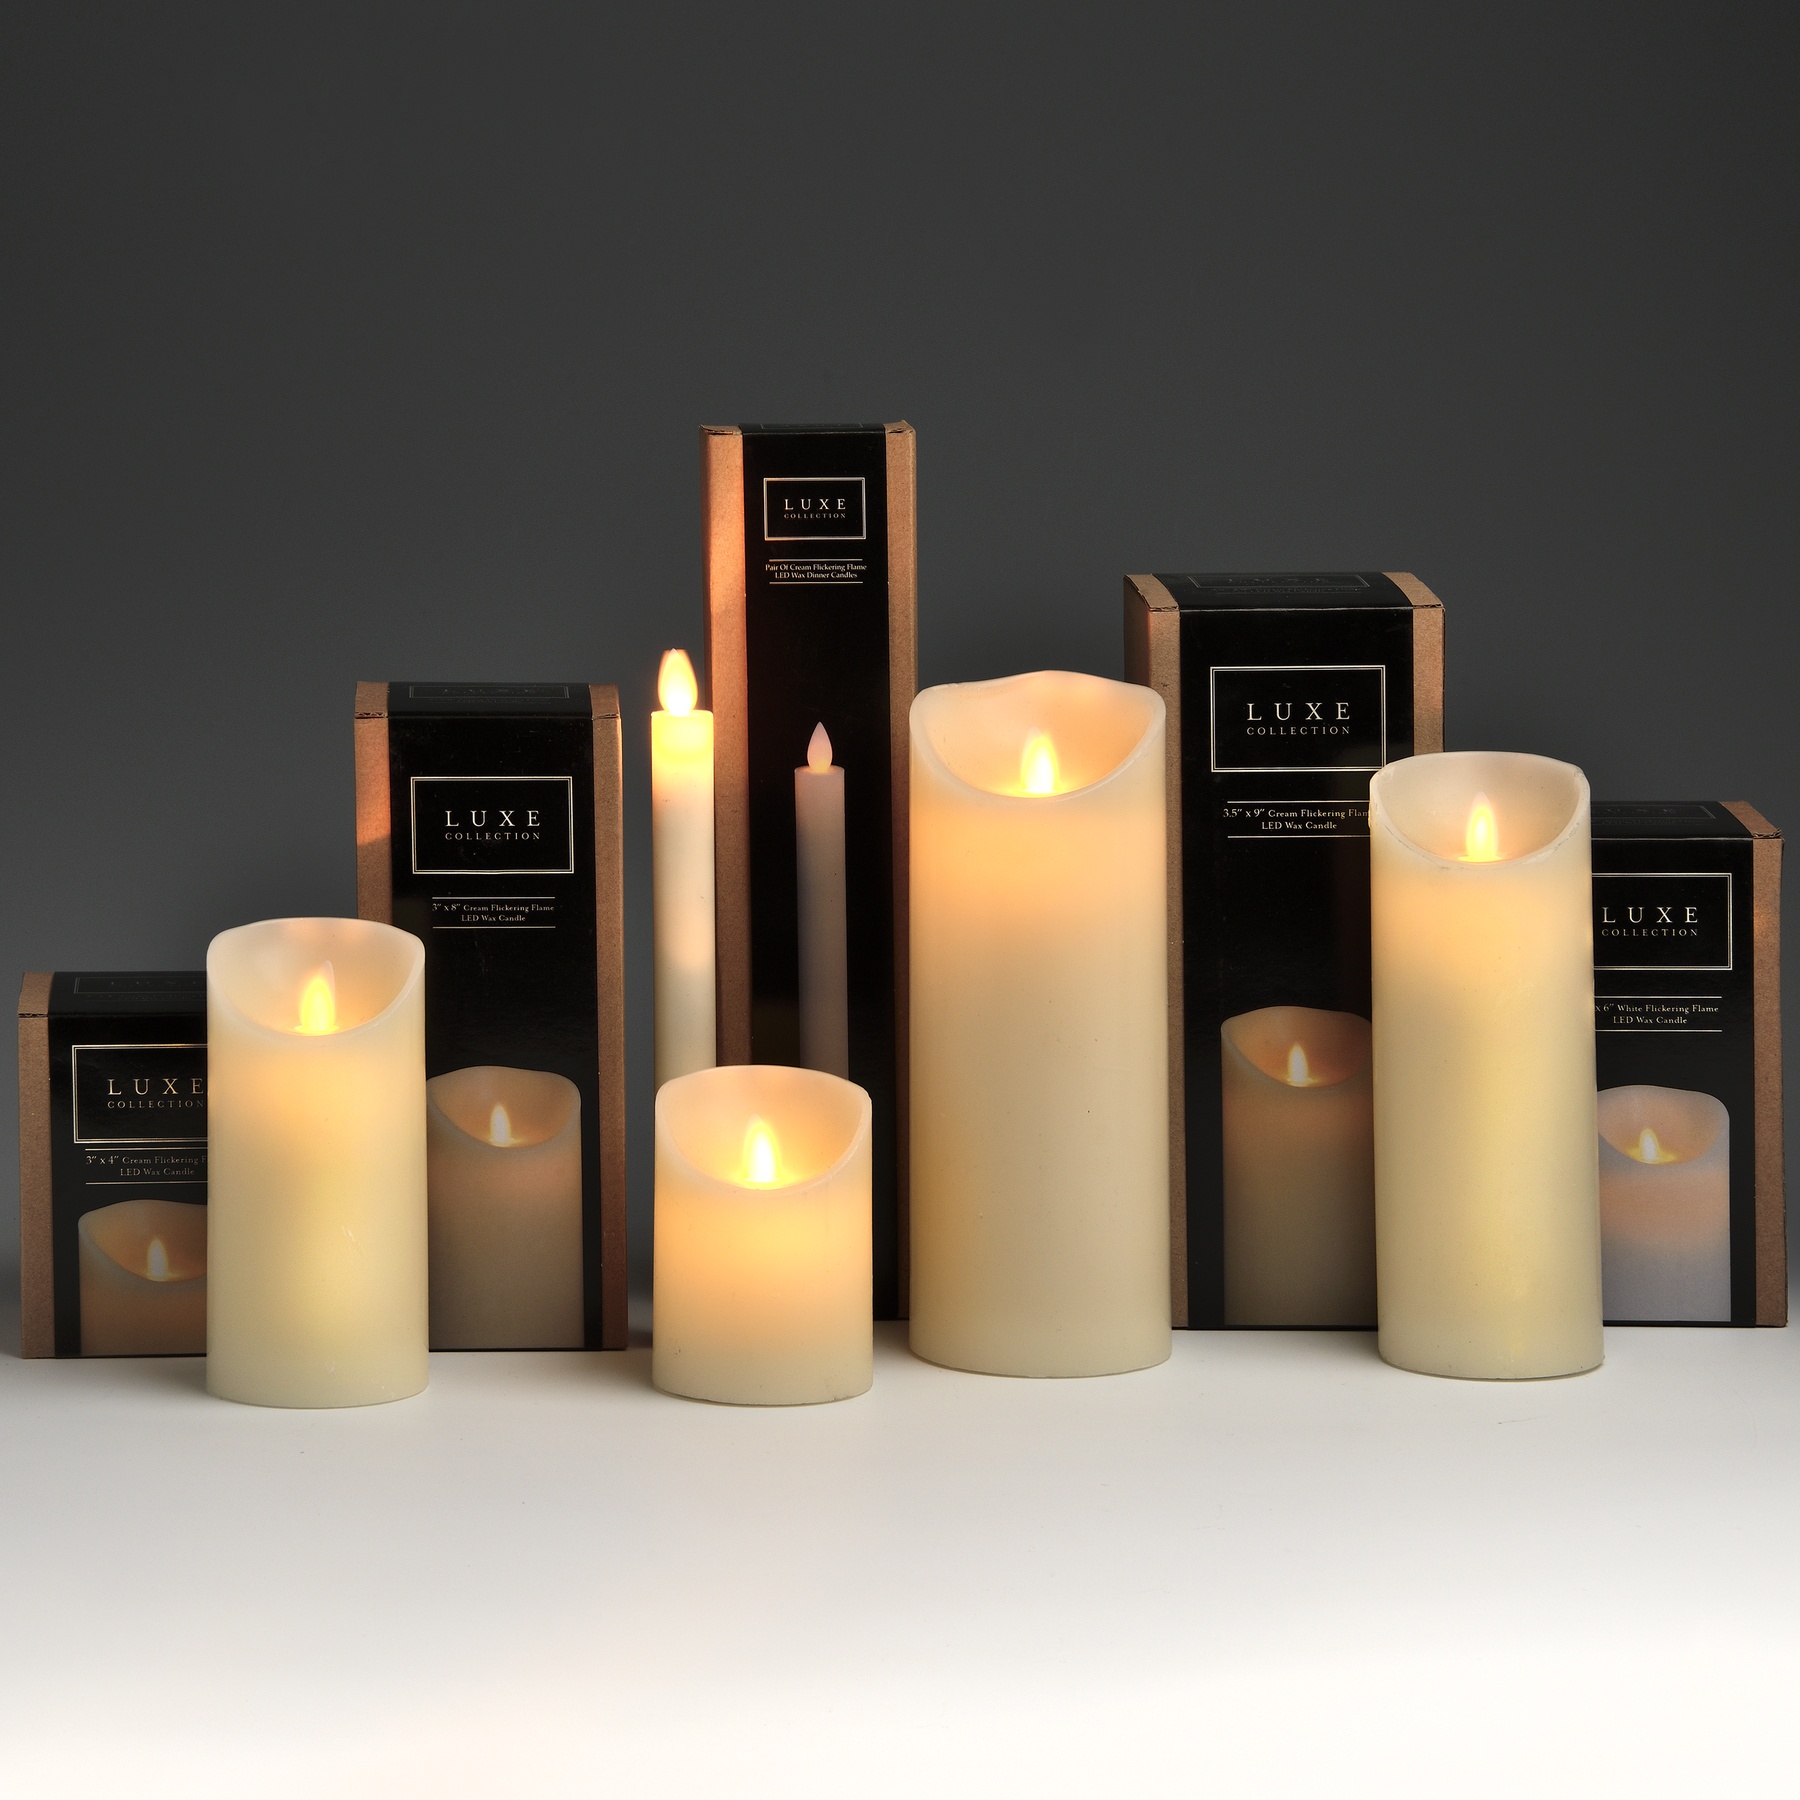 Luxe Collection 3 x 4 Cream Flickering Flame LED Wax Candle - Image 4